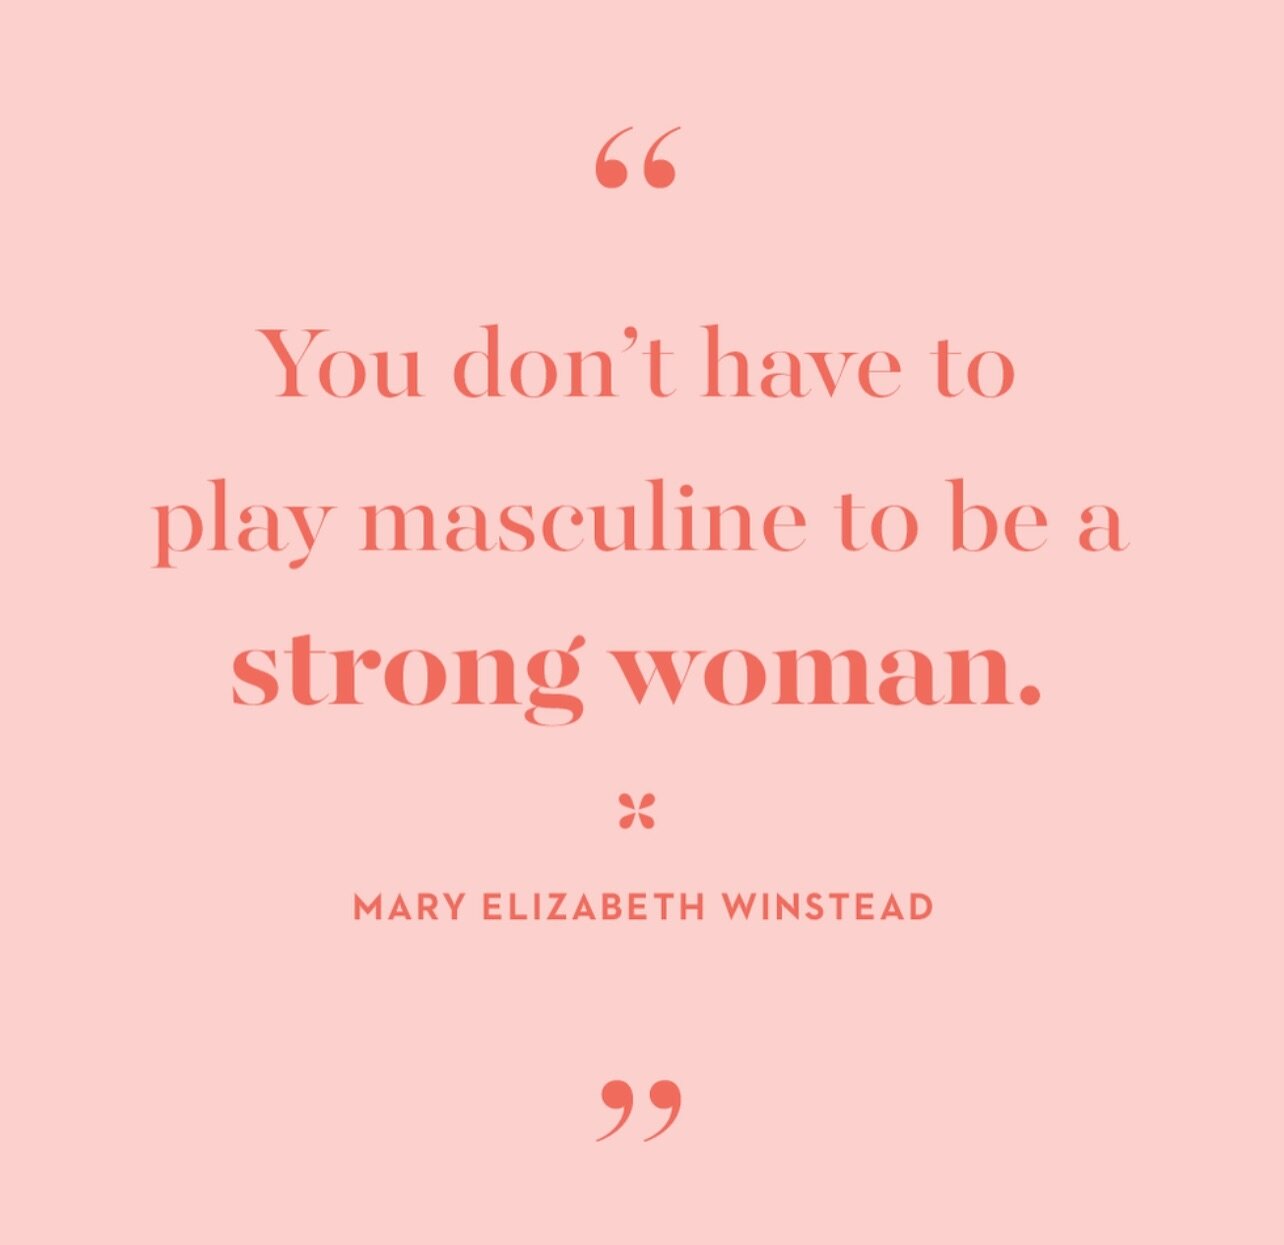 There are so many fabulous quotes from amazing women which I could post today. This one resonates a lot for me when I look back over the years at times when I wish I&rsquo;d been stronger without compromising my beliefs and my identity. Happy #intern